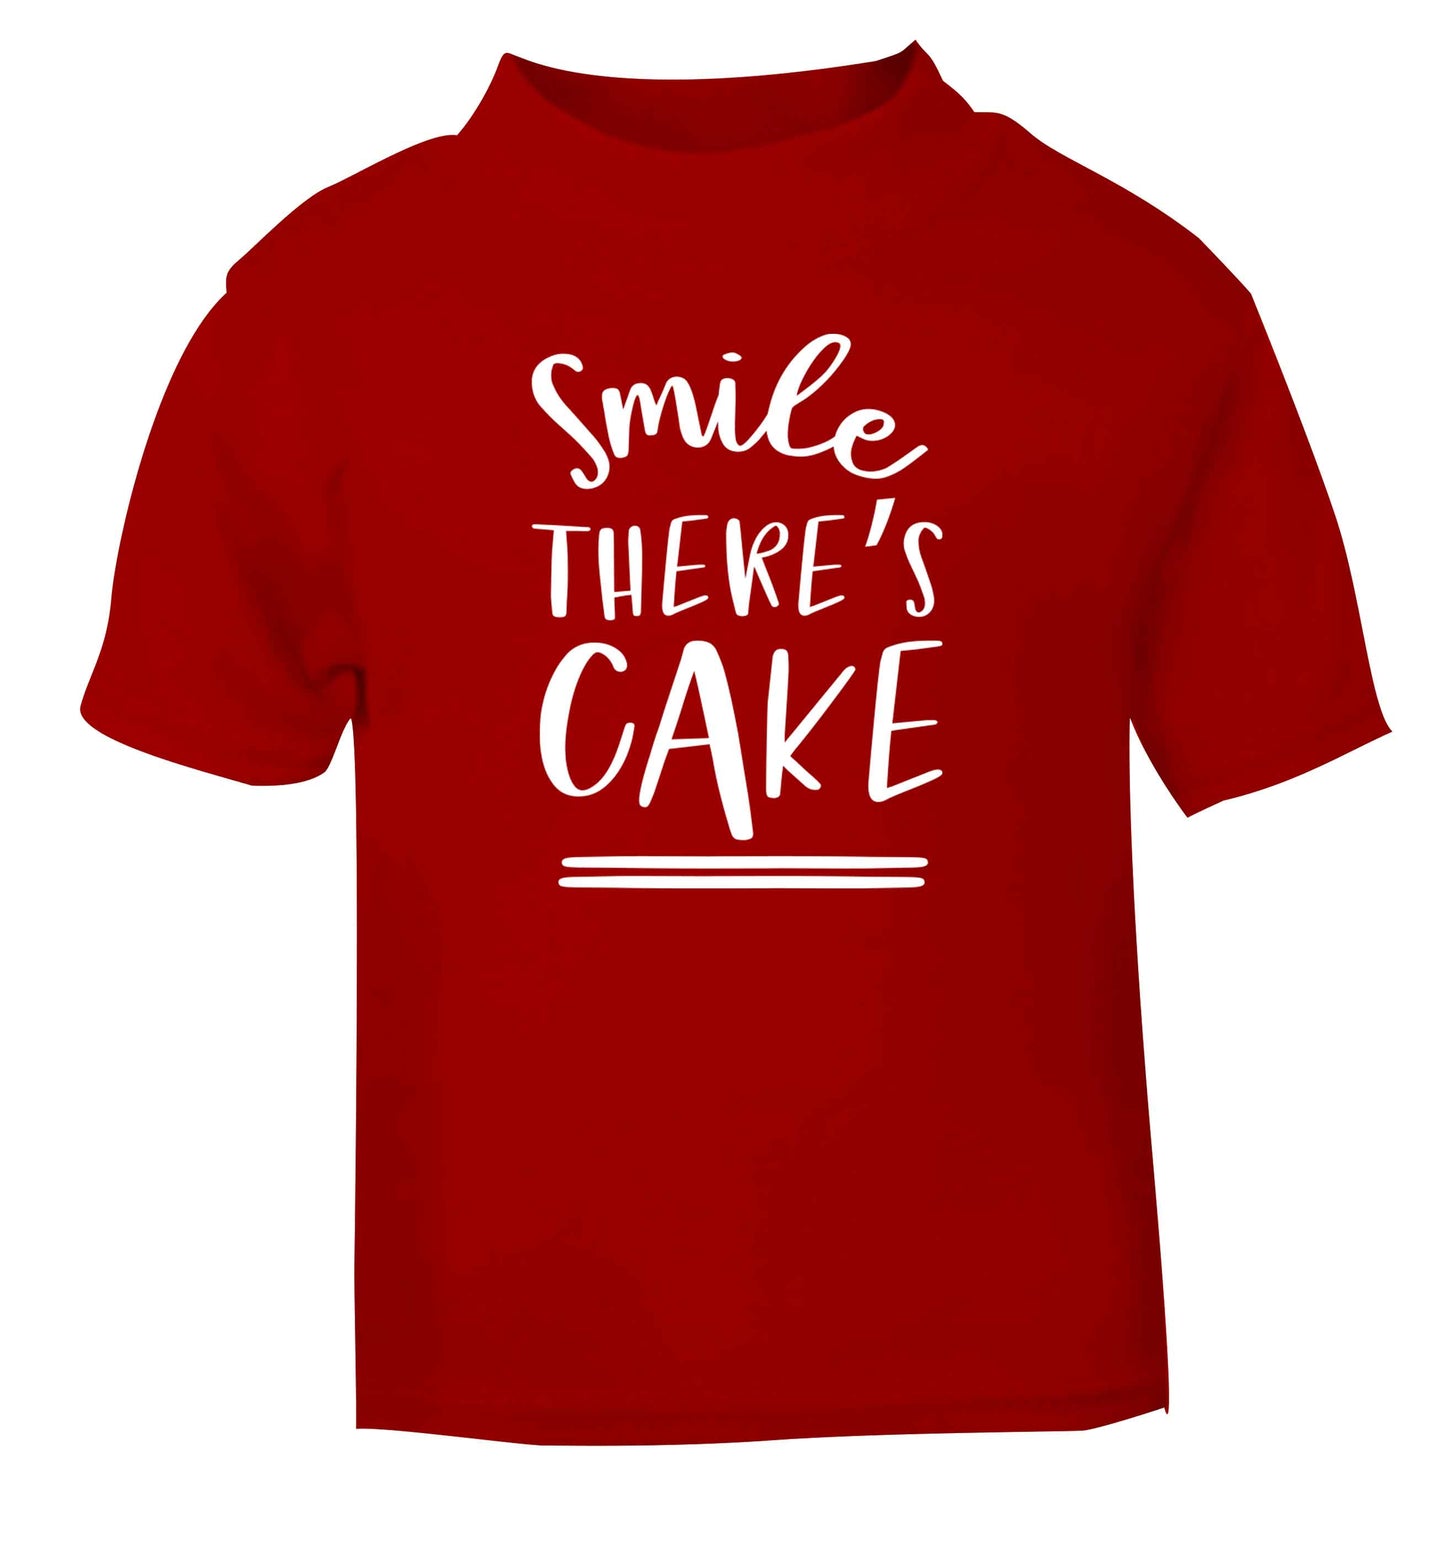 Smile there's cake red Baby Toddler Tshirt 2 Years